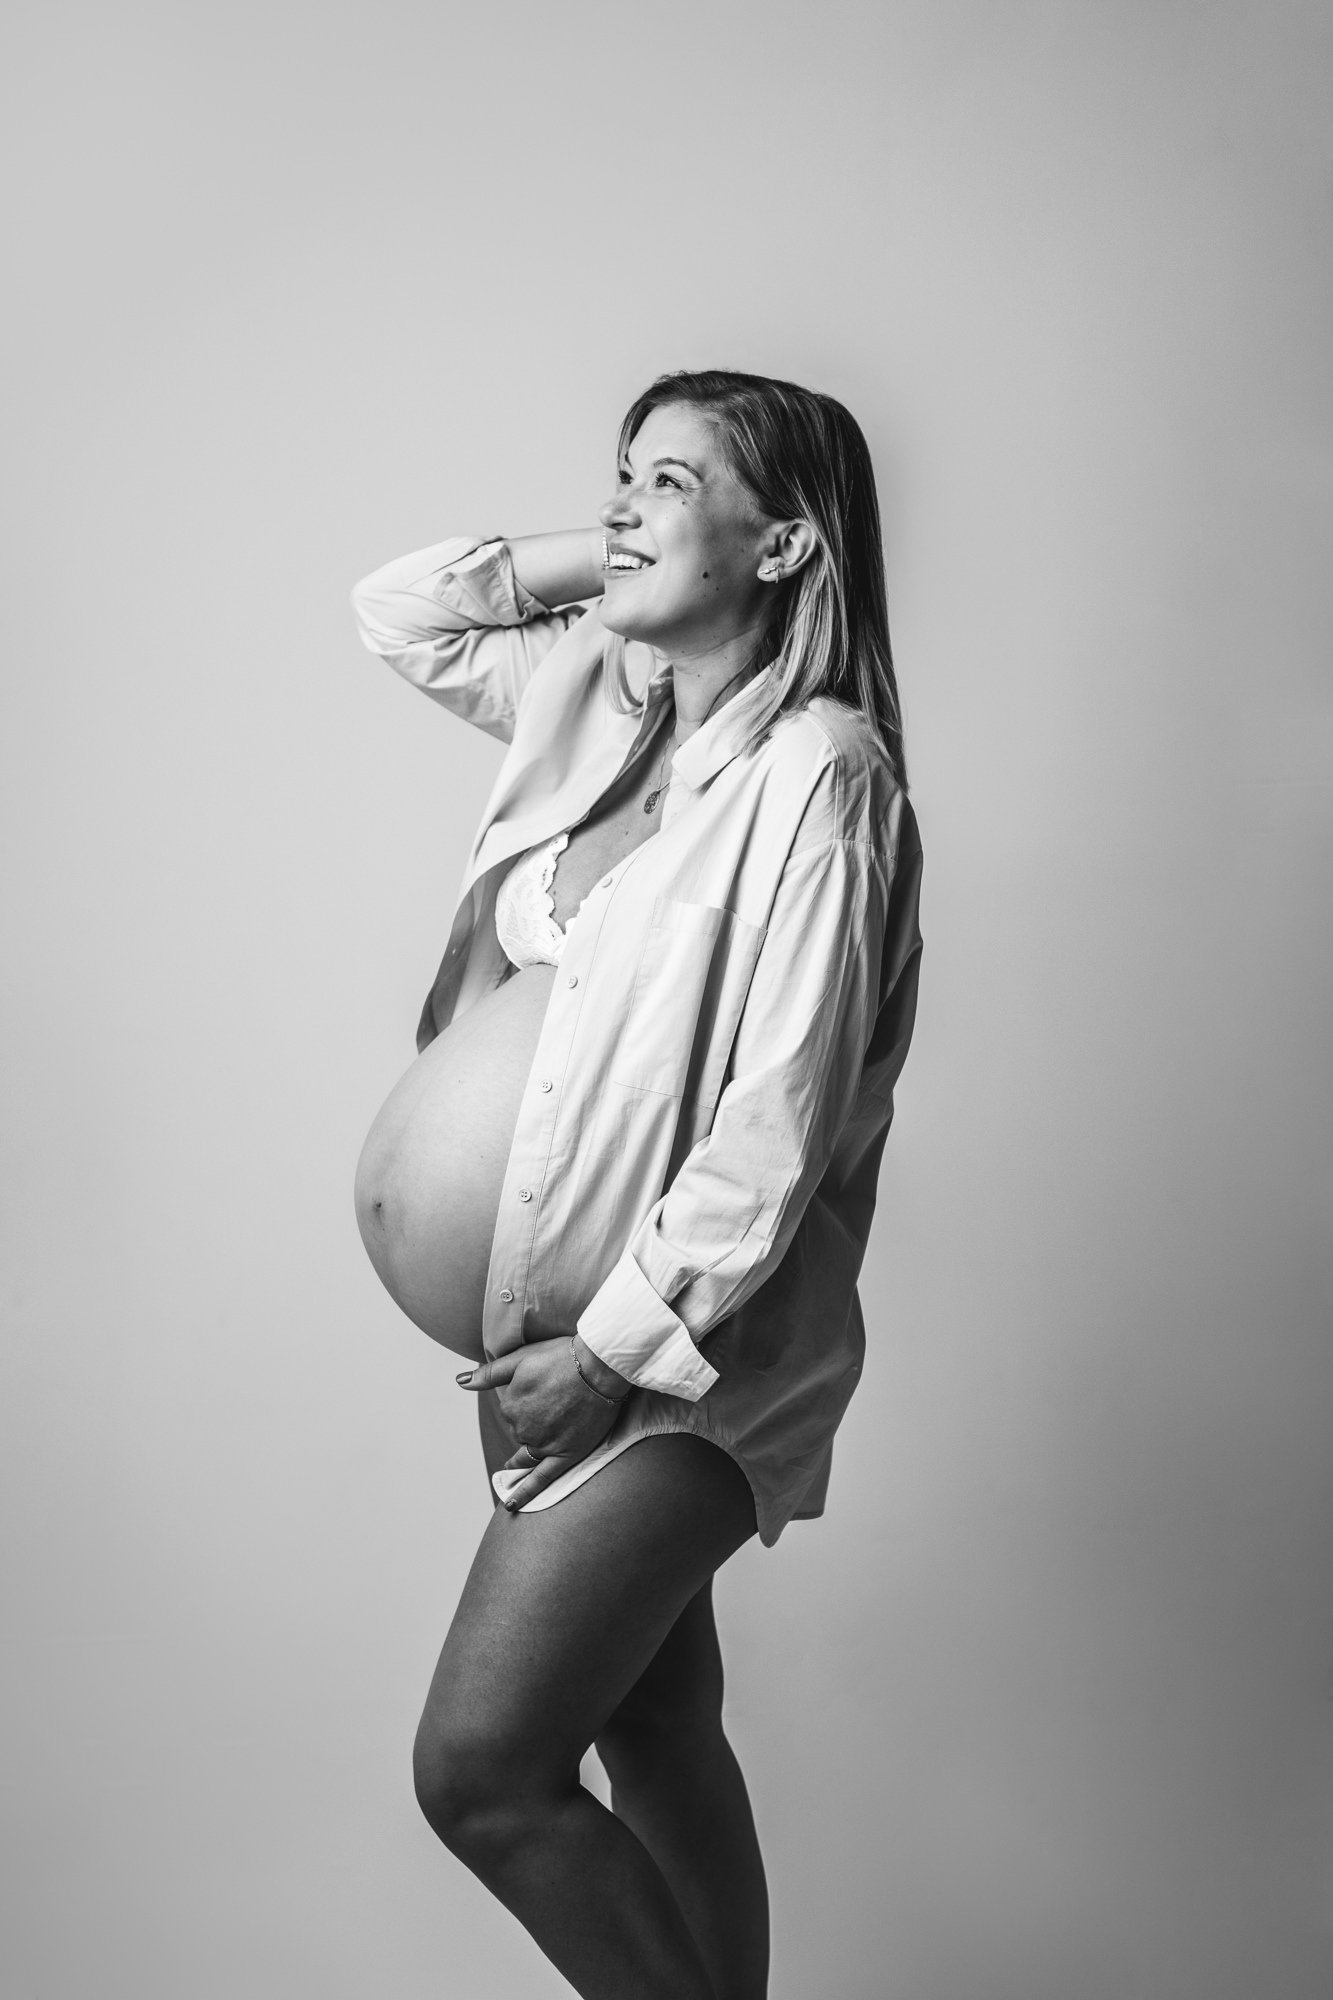  A black and white portrait of a pregnant woman with an exposed belly and button-up shirt by Nicole Hawkins Photography. exposed belly with button up shirt and bra #NicoleHawkinsPhotography #NicoleHawkinsMaternity #MaternityStudioPortraits #FamilyMat